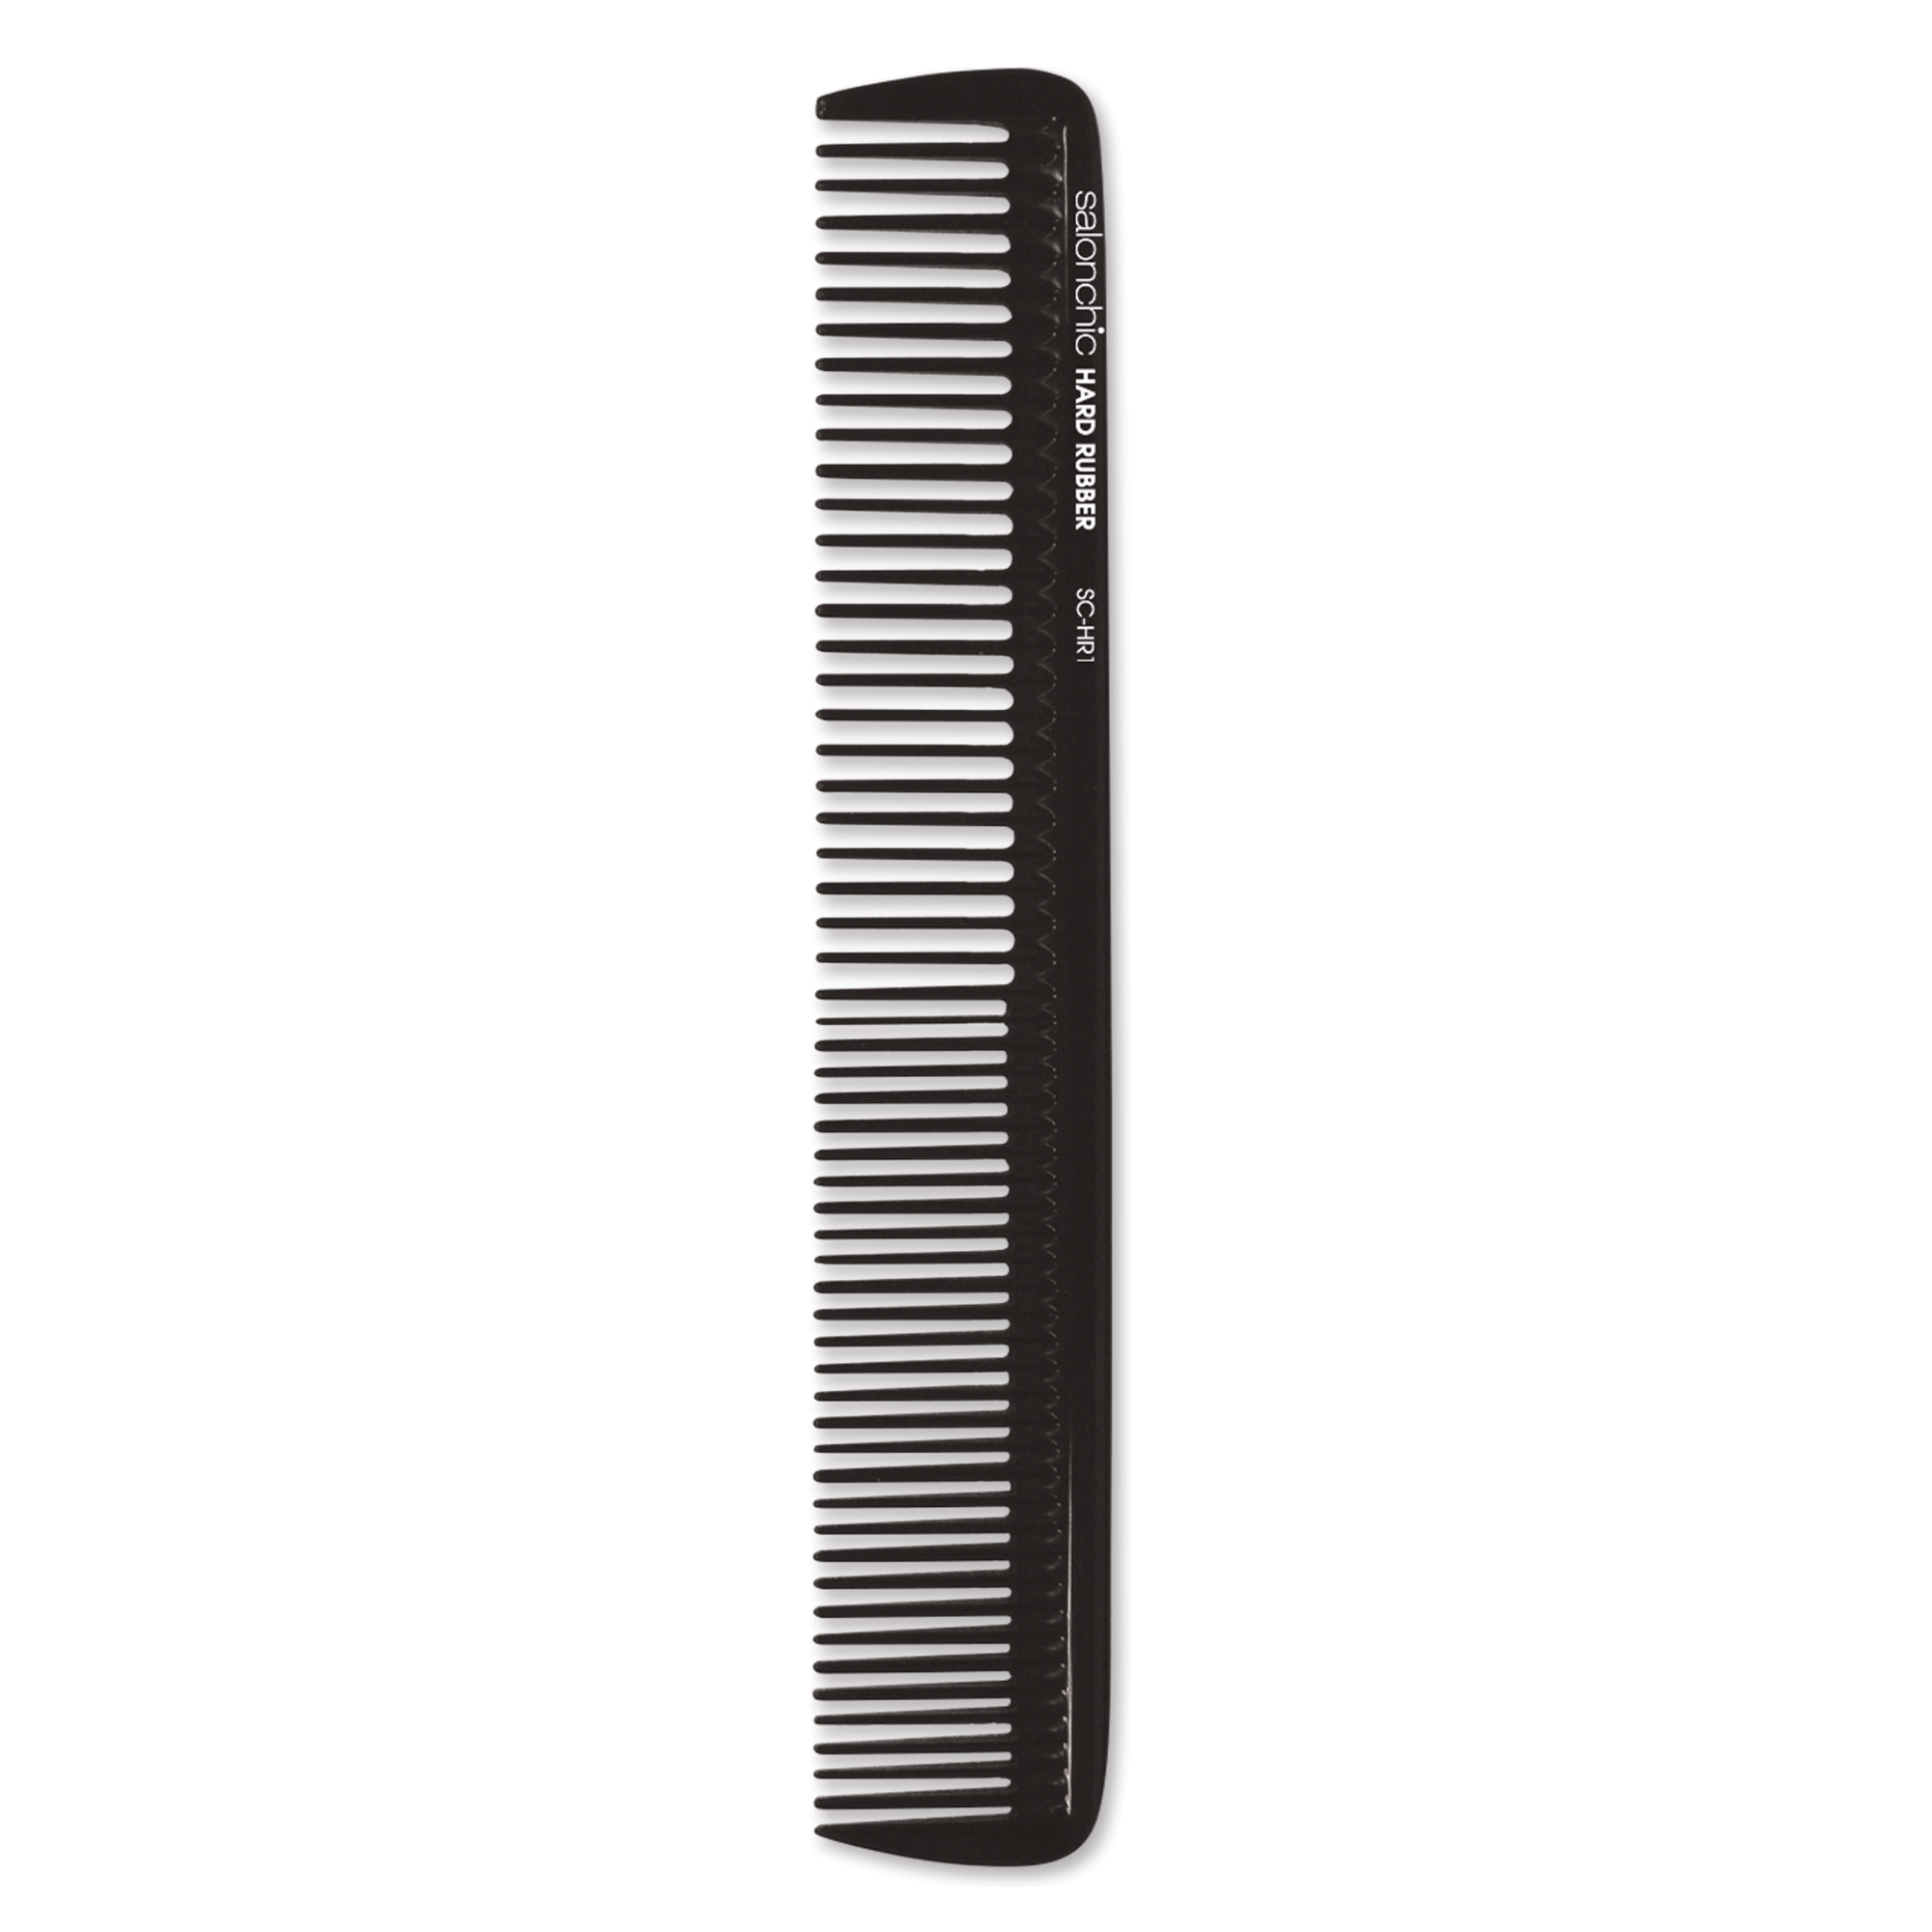 Hard Rubber Styling Comb - 7-1/4"